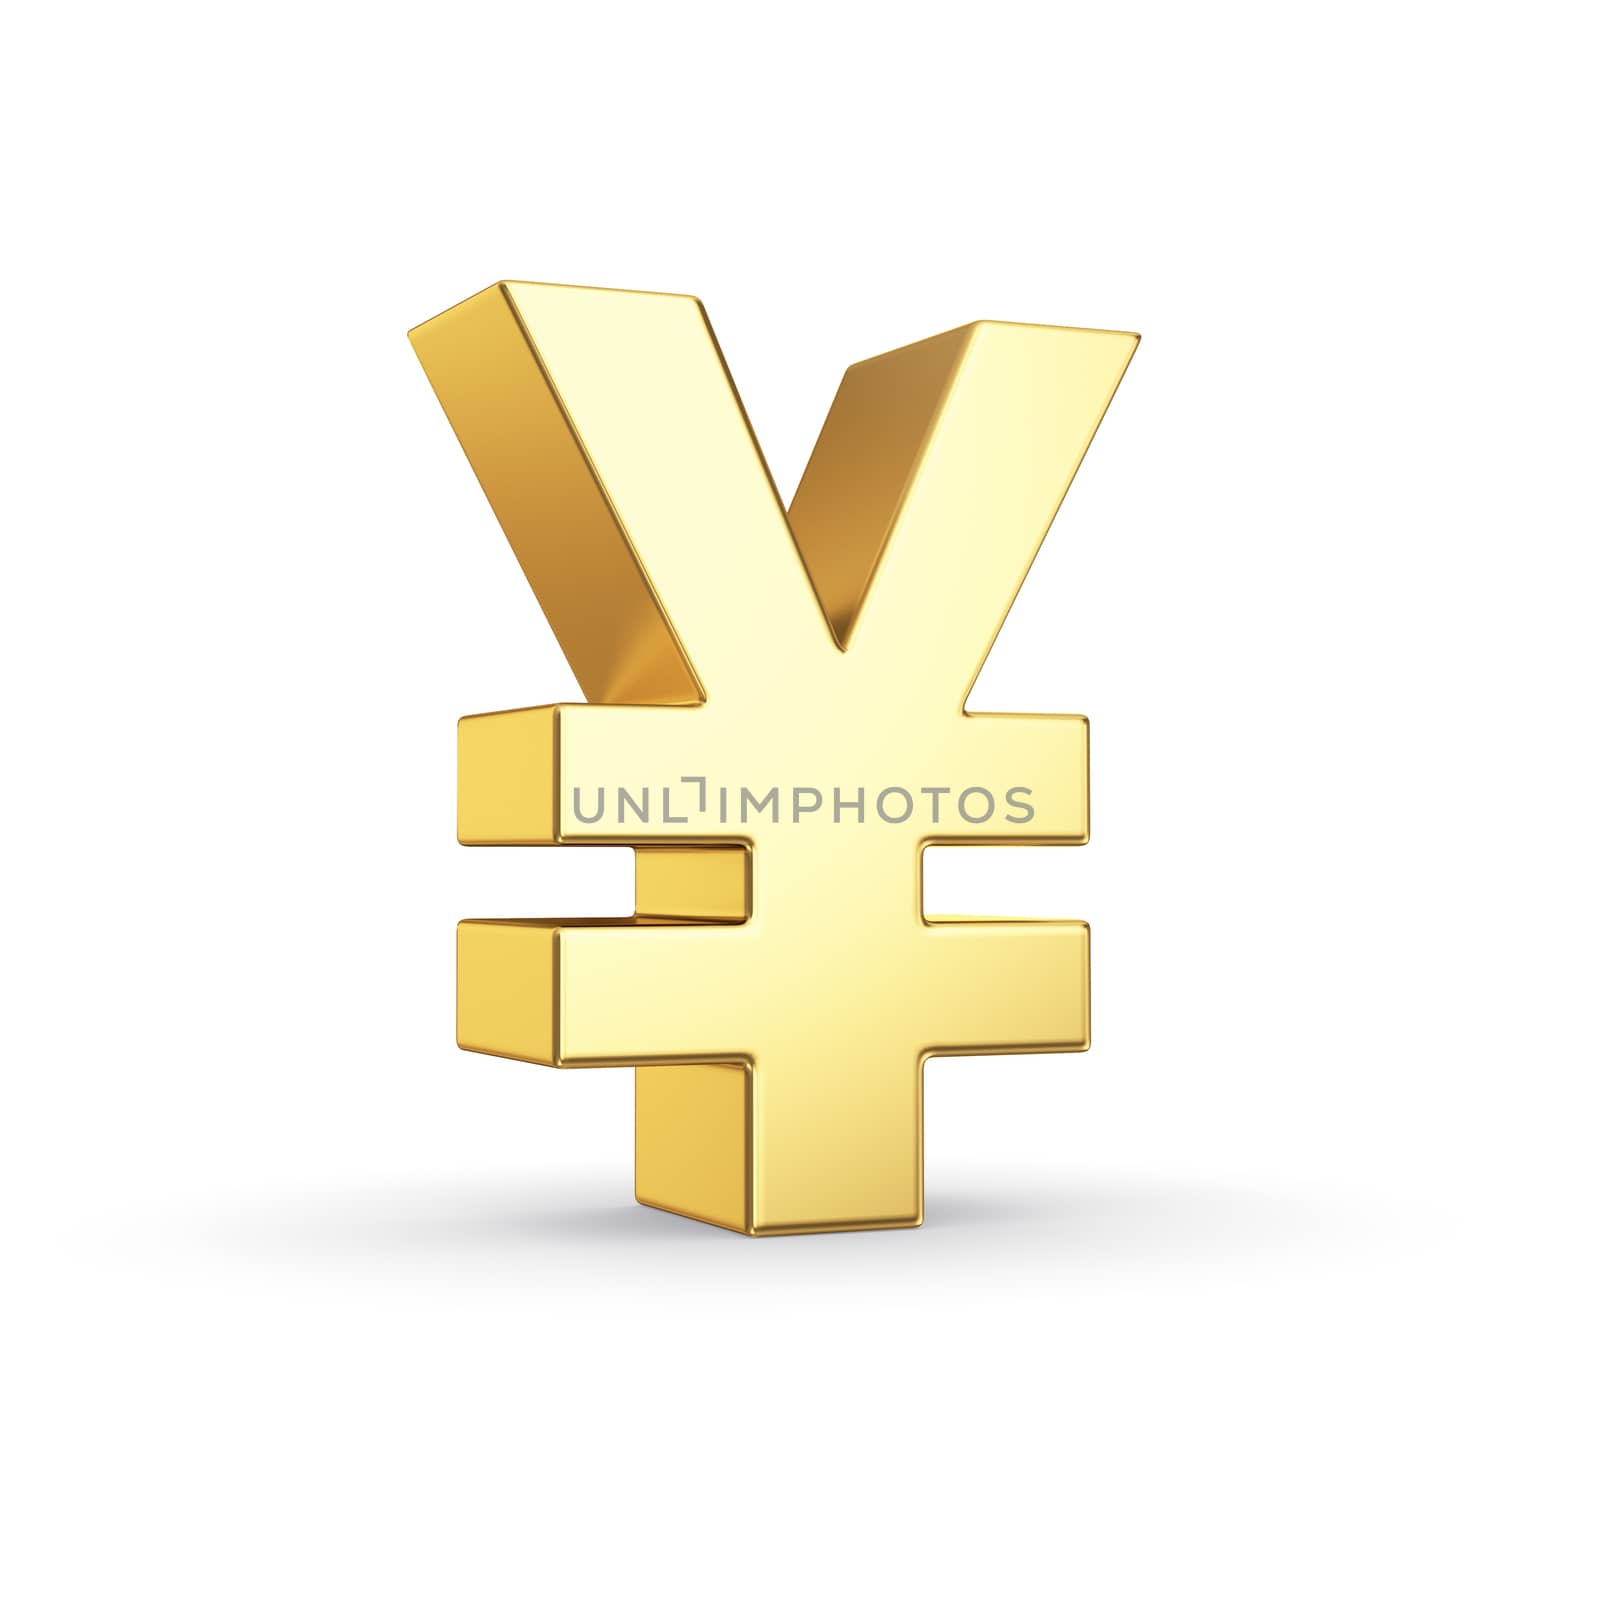 Golden currency symbol isolated on white with clipping path